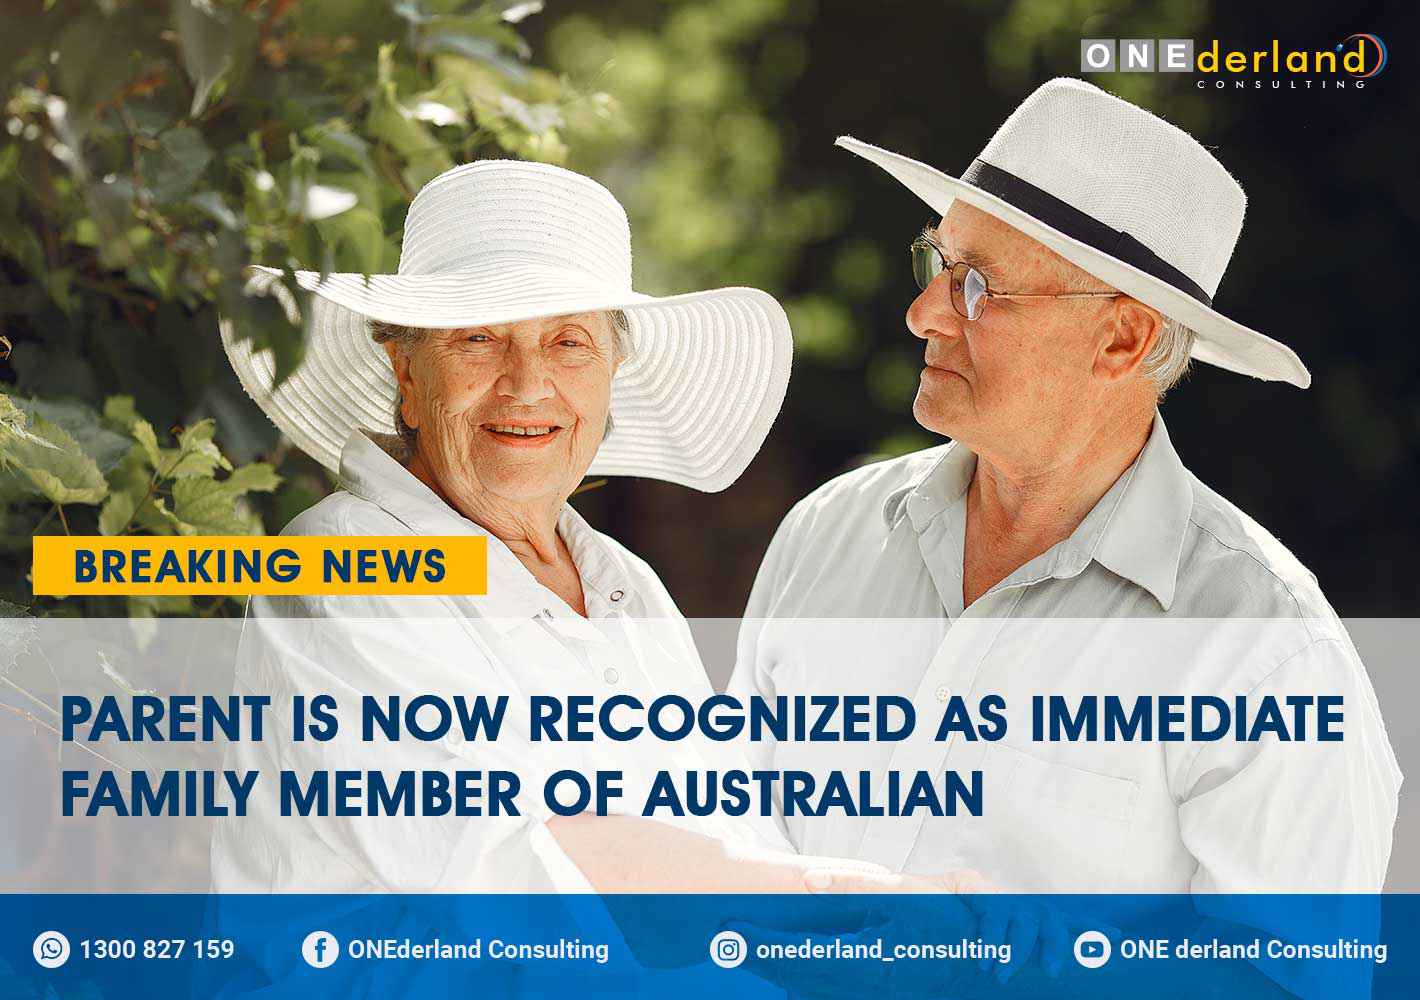 Parent is now recognized as immediate family member of Australian